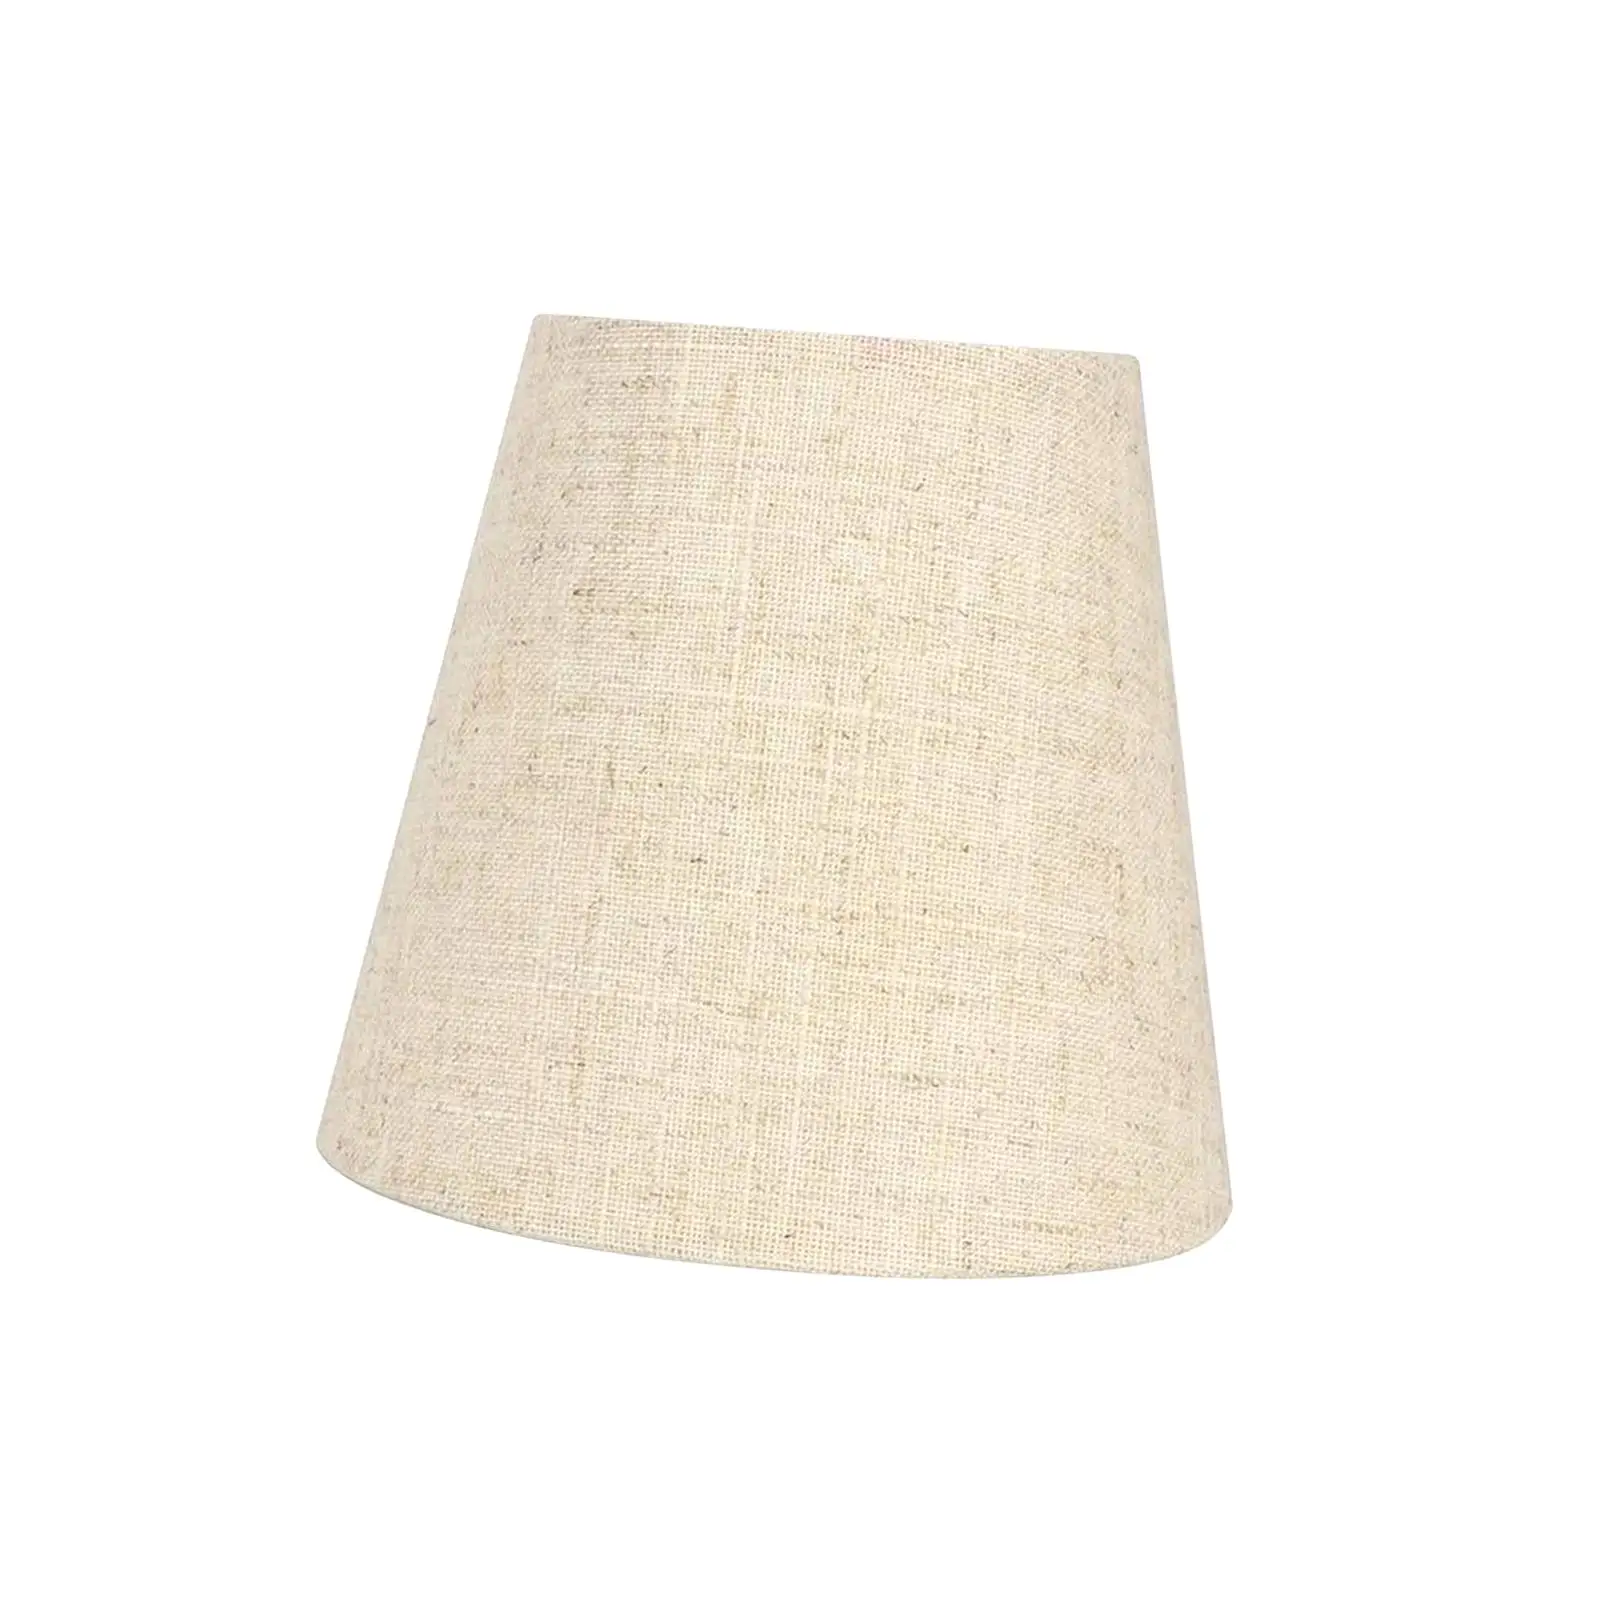 Vintage Style Fabric Lampshade Lighting Fixtures Cover Lamp Shade for Tearoom Home Restaurant Bedroom Decoration